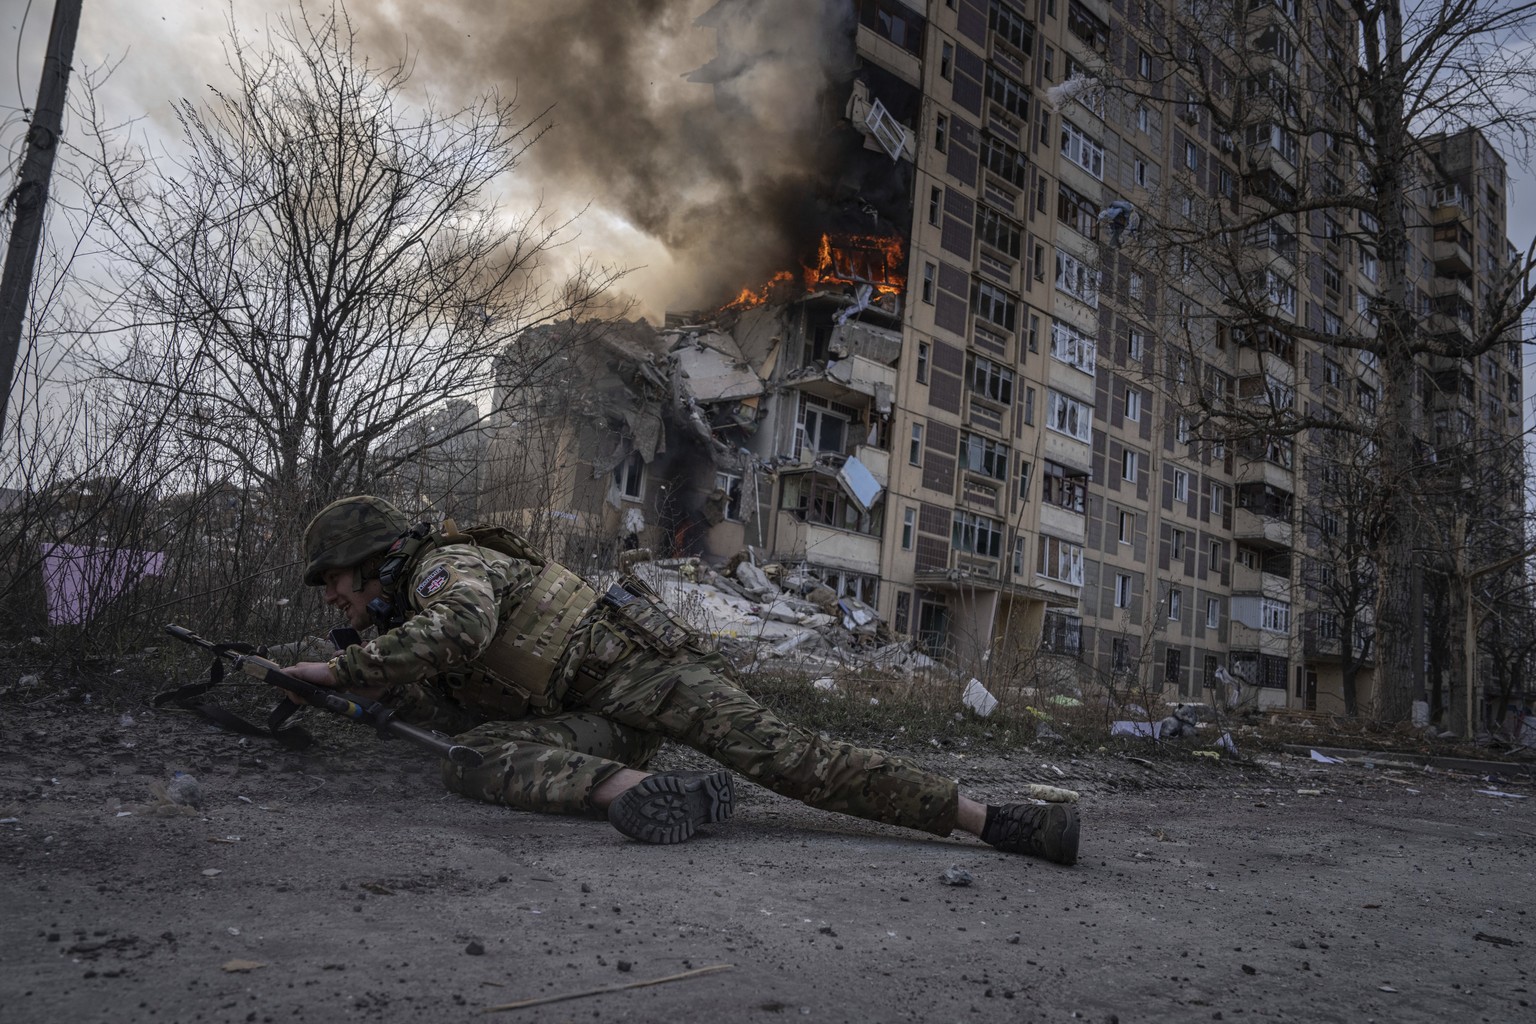 A Ukrainian police officer takes cover in front of a burning building that was hit in a Russian airstrike in Avdiivka, Ukraine, Friday, March 17, 2023. For months, authorities have been urging civilia ...